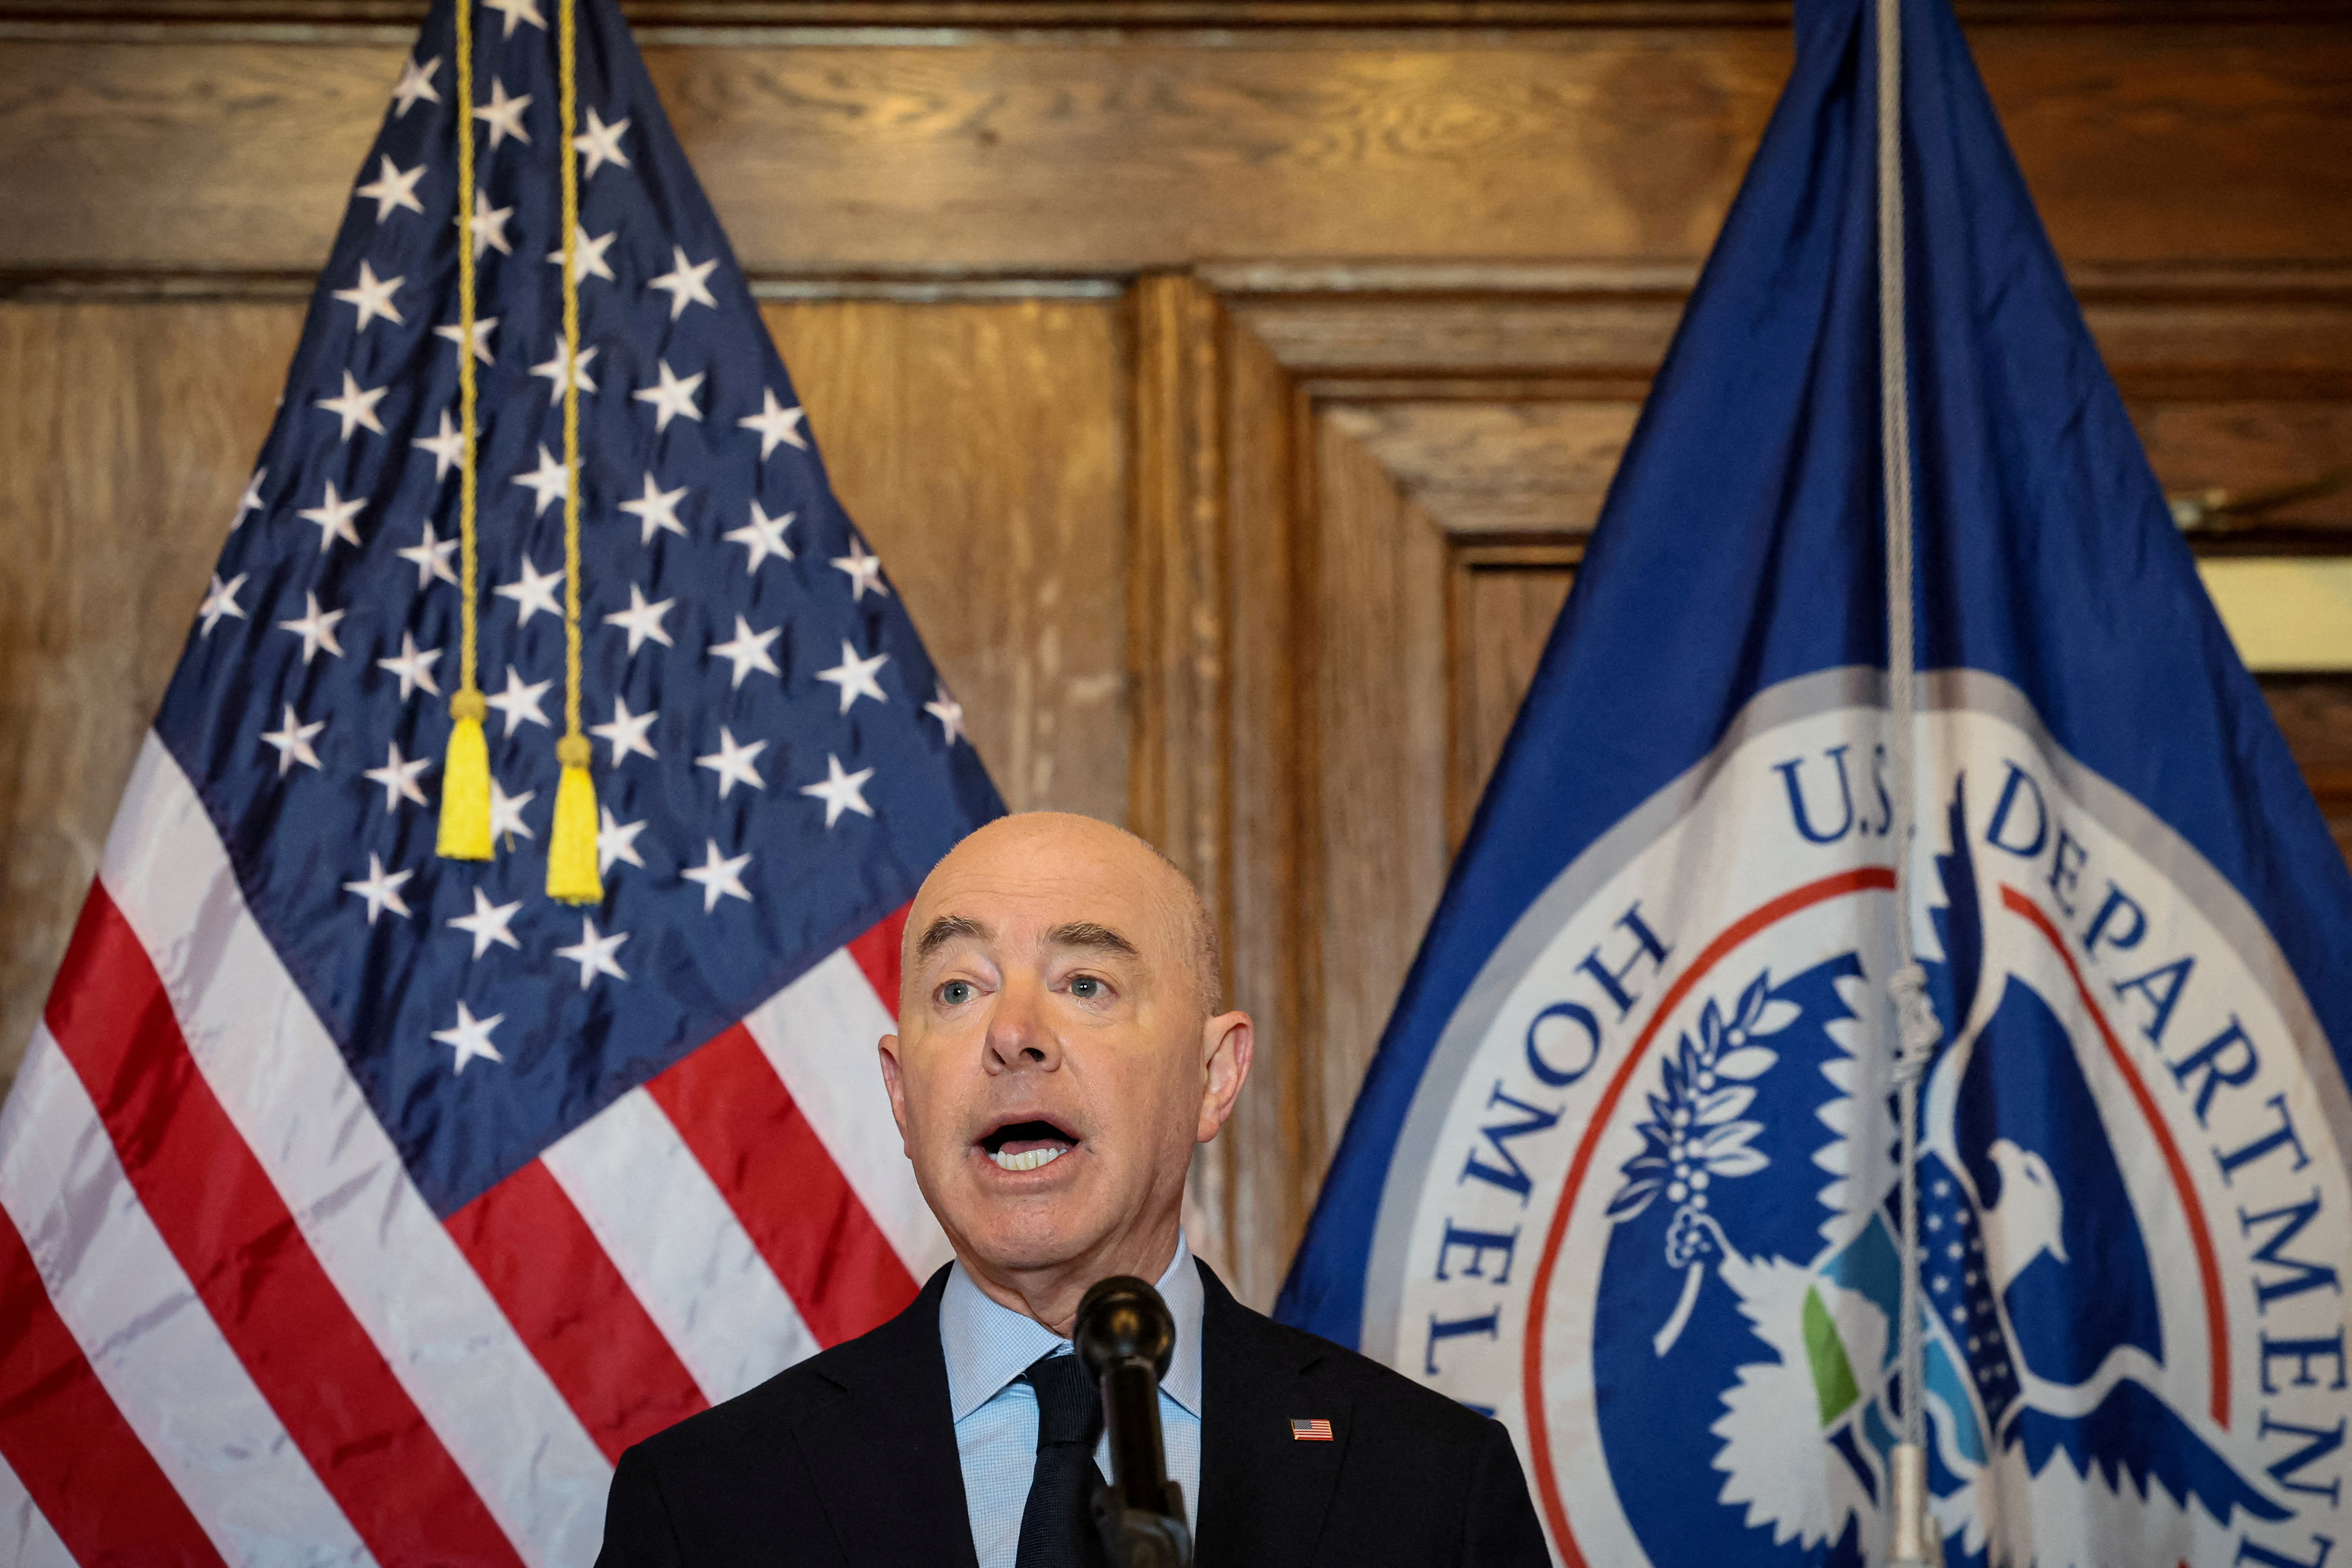 Department of Homeland Security (DHS) Secretary Mayorkas speaks at a news conference in New York